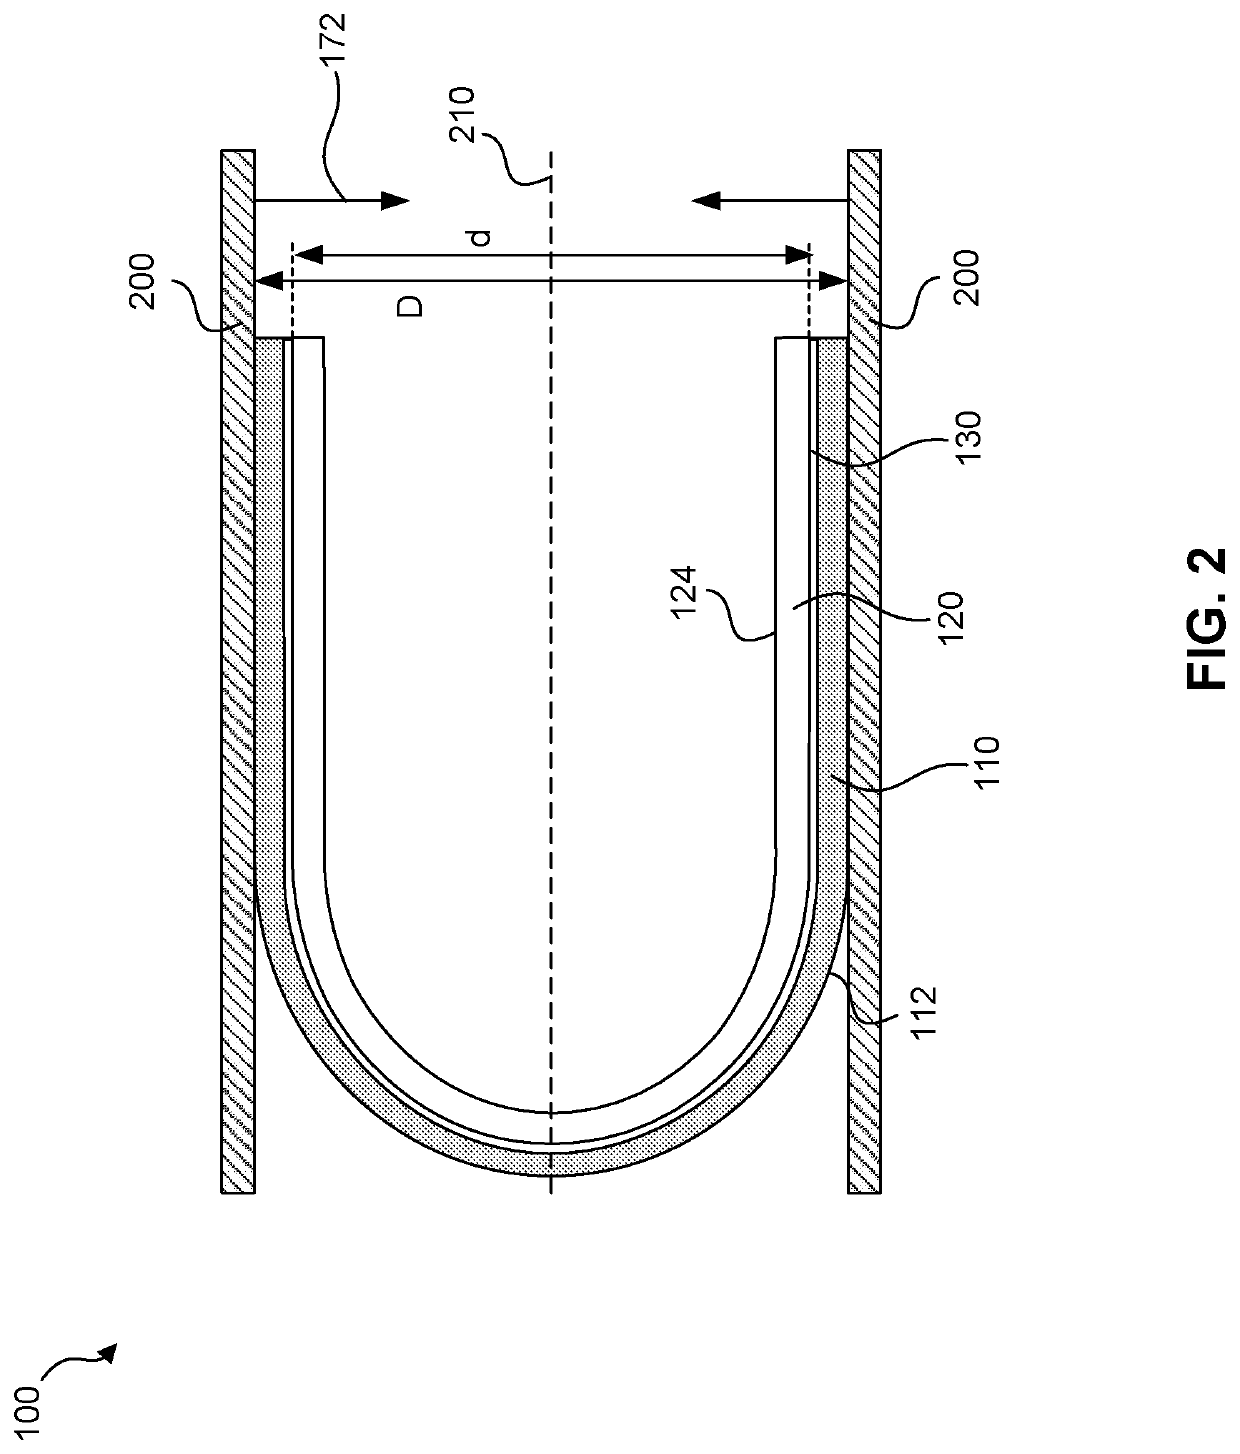 Bendable articles including adhesive layer with a dynamic elastic modulus